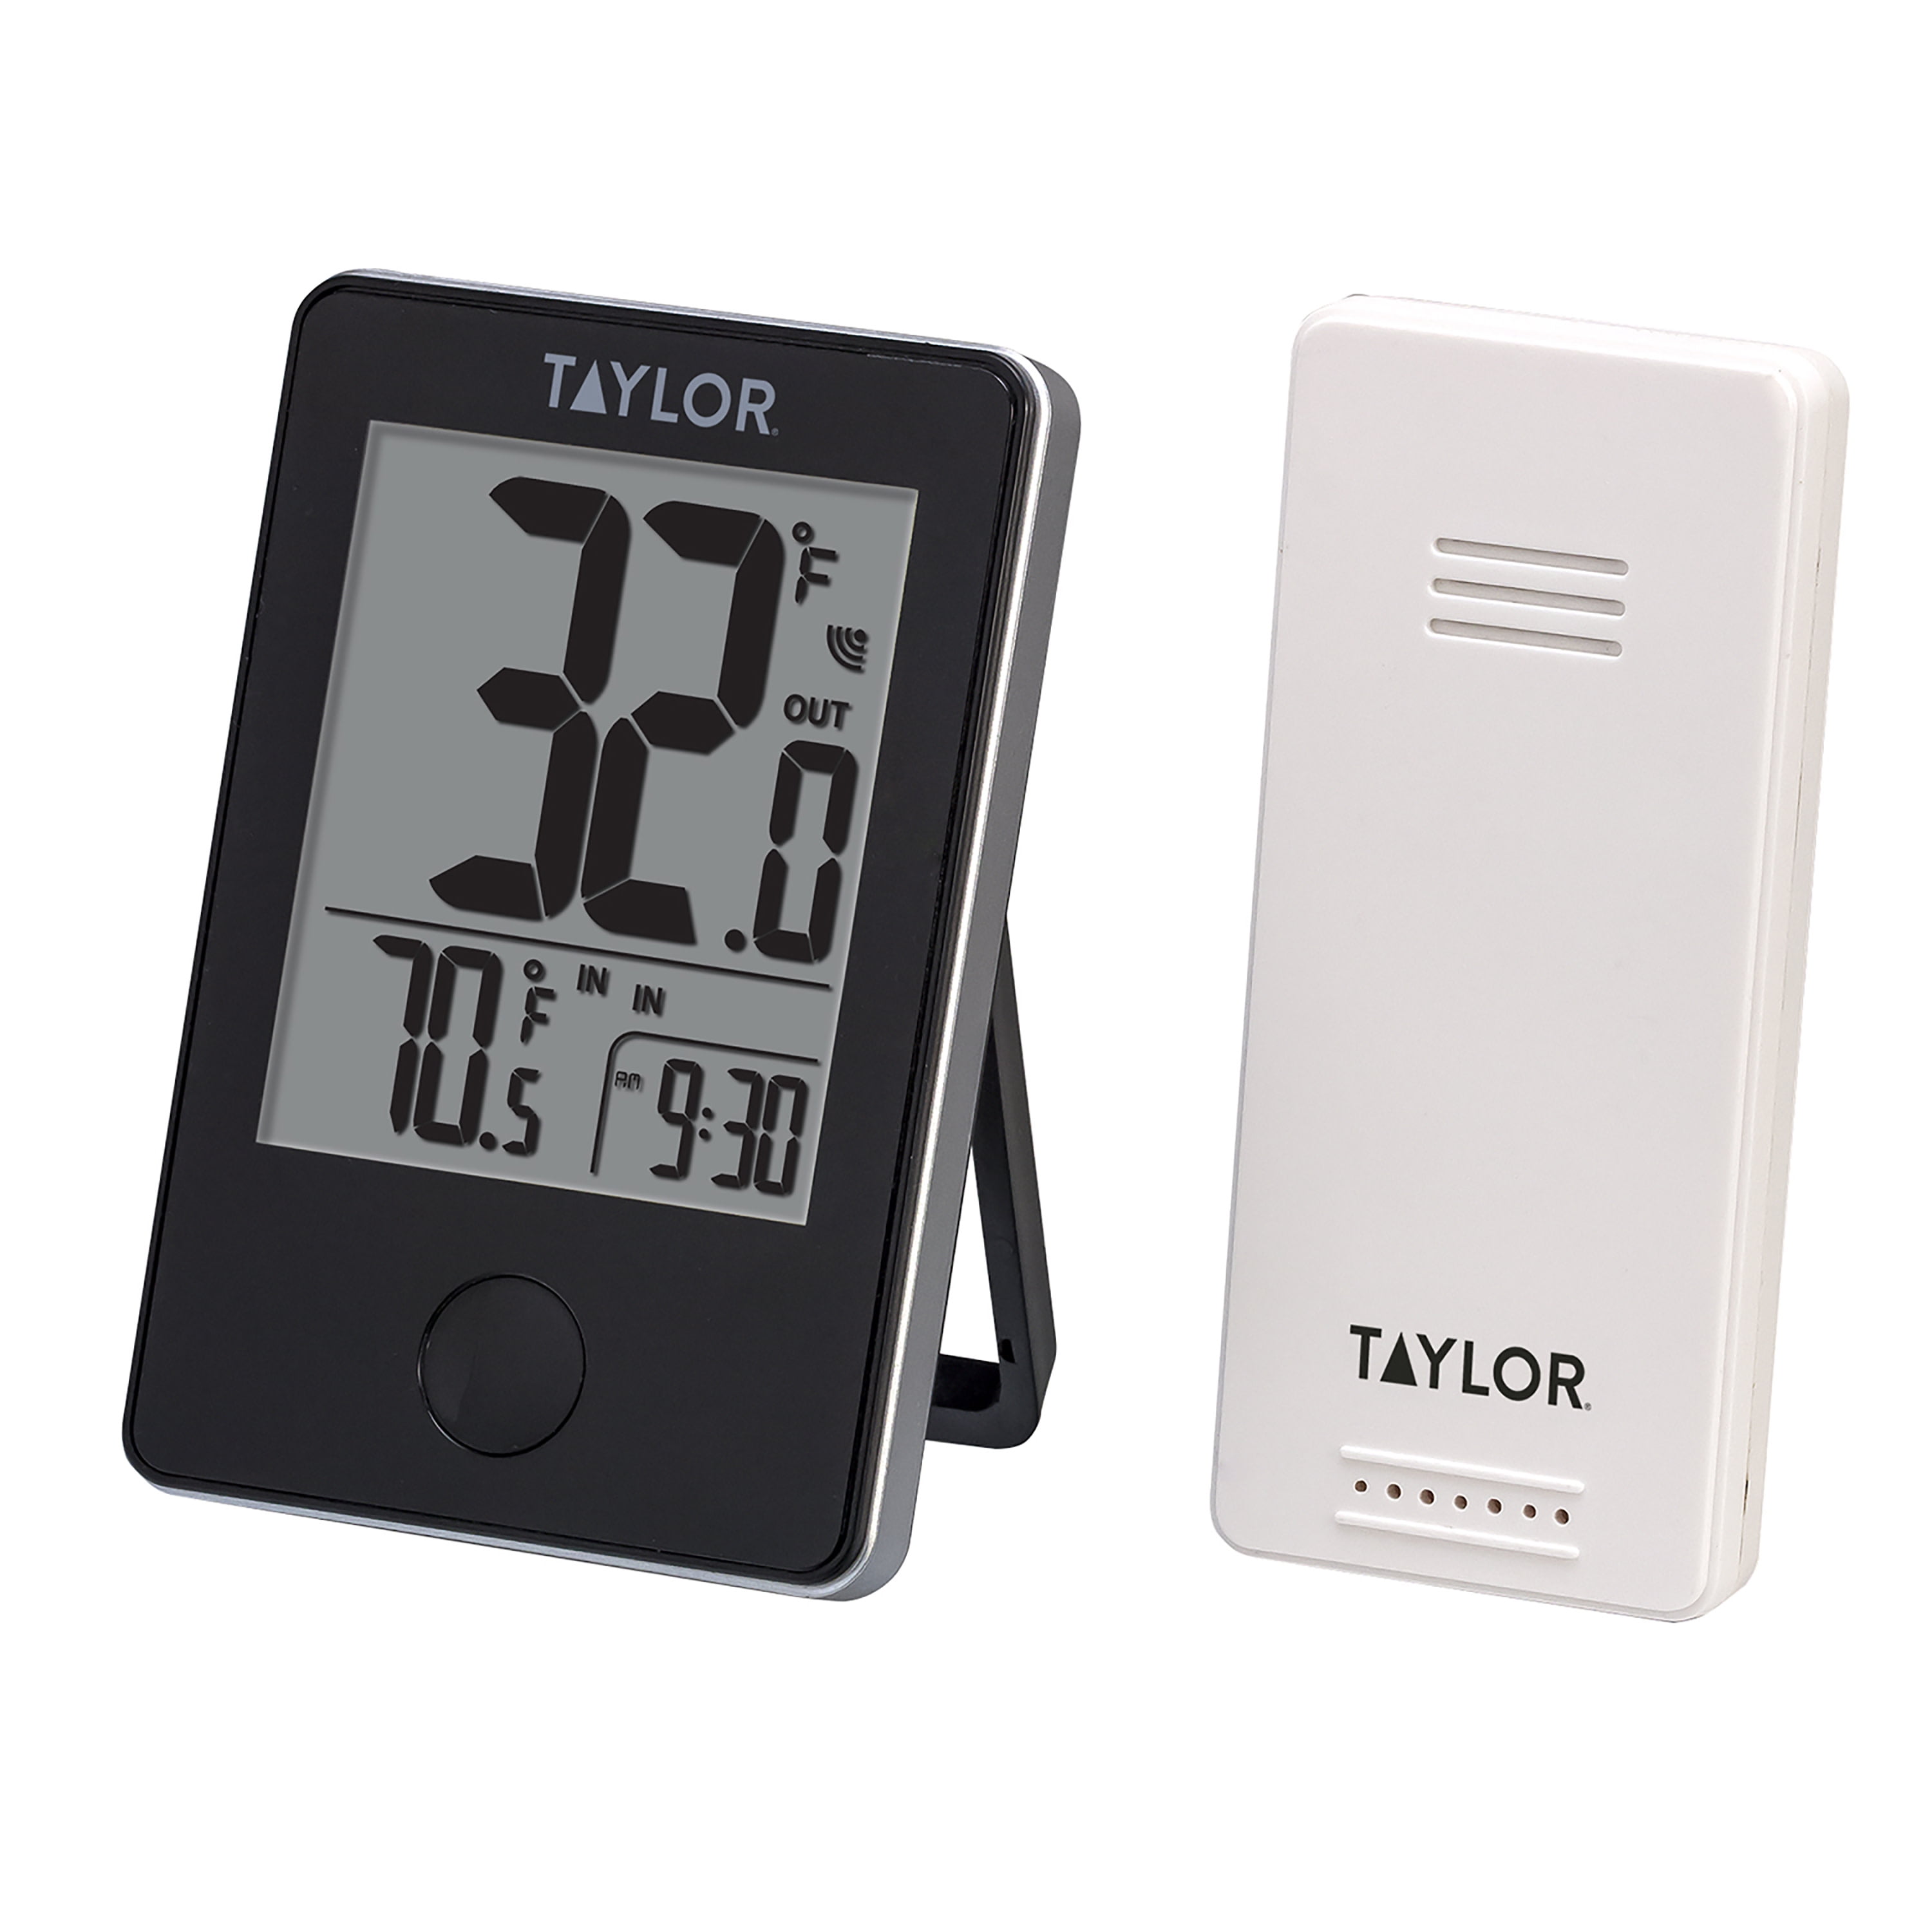 Taylor 5327 Indoor / Outdoor Thermometer